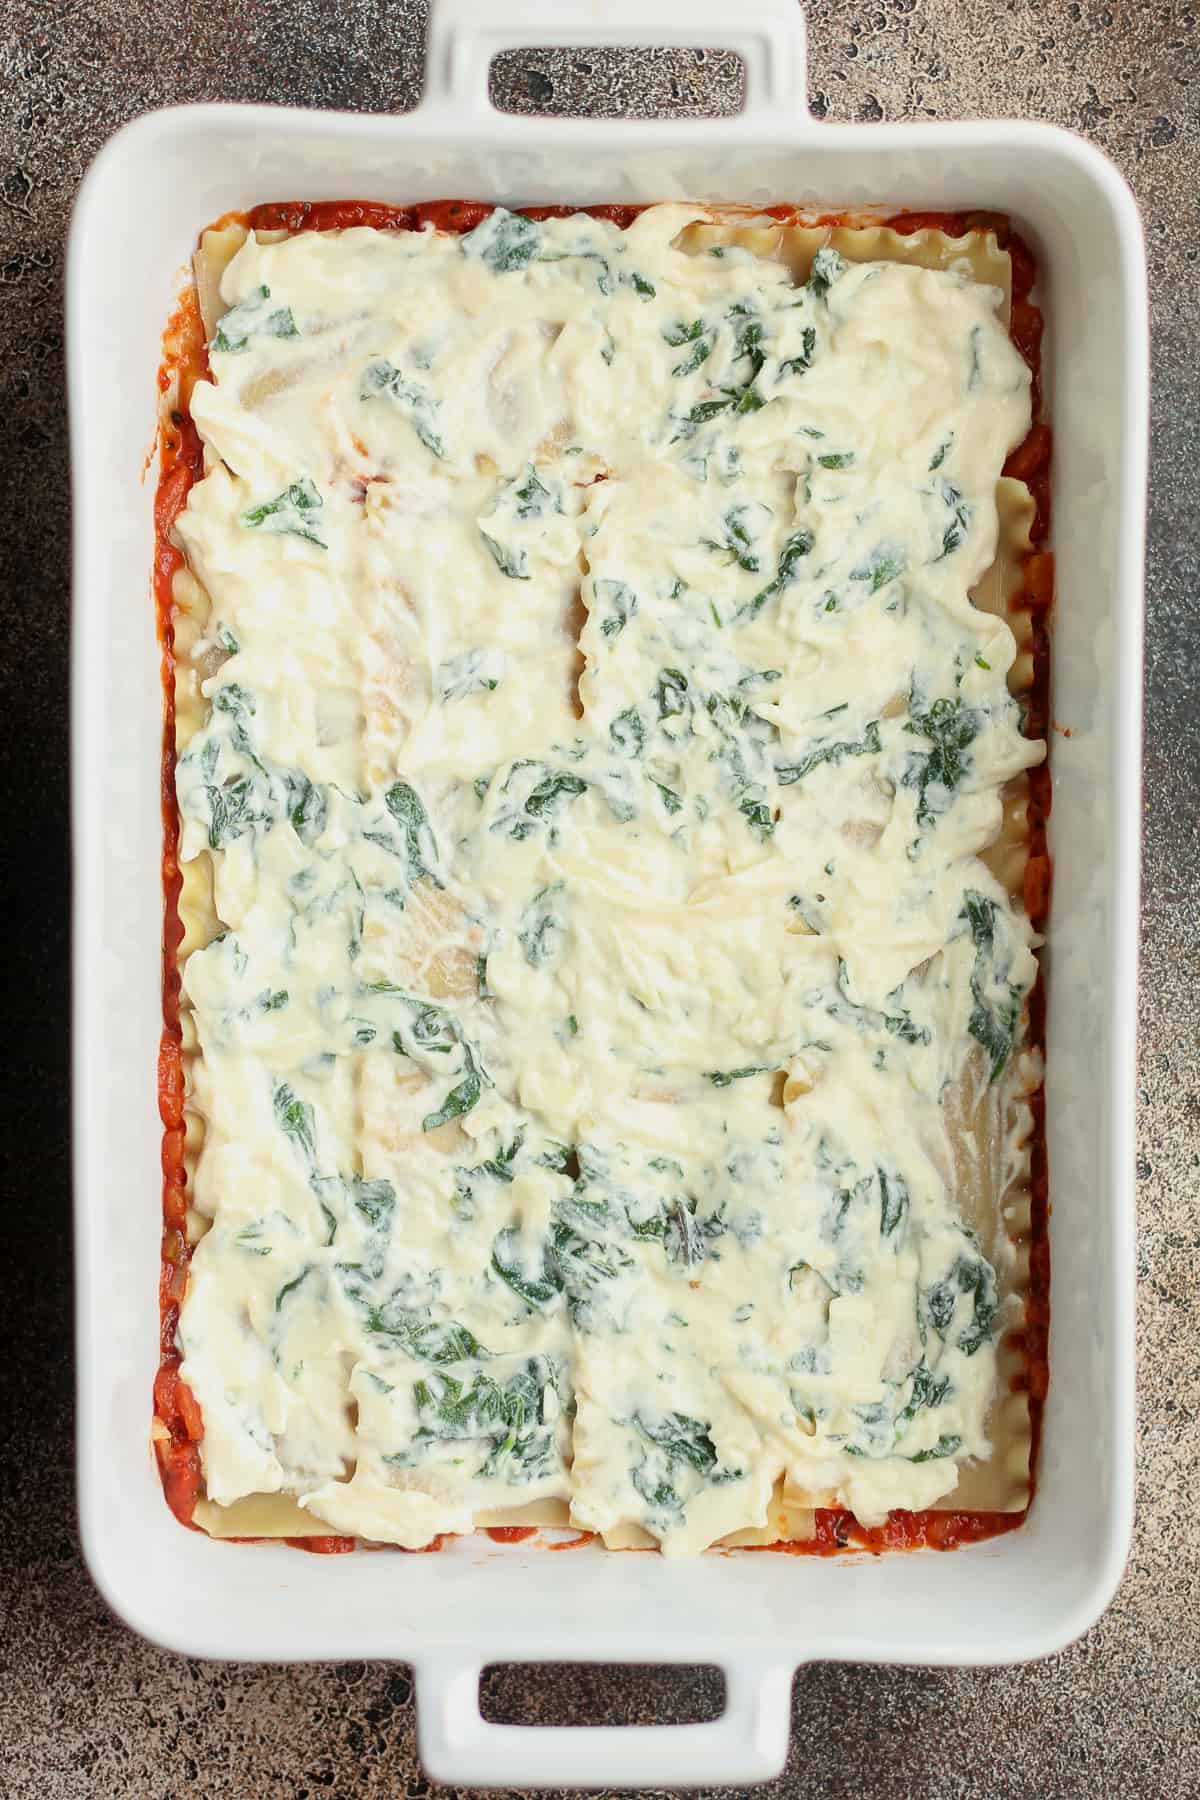 The casserole layers with the ricotta and spinach on top.